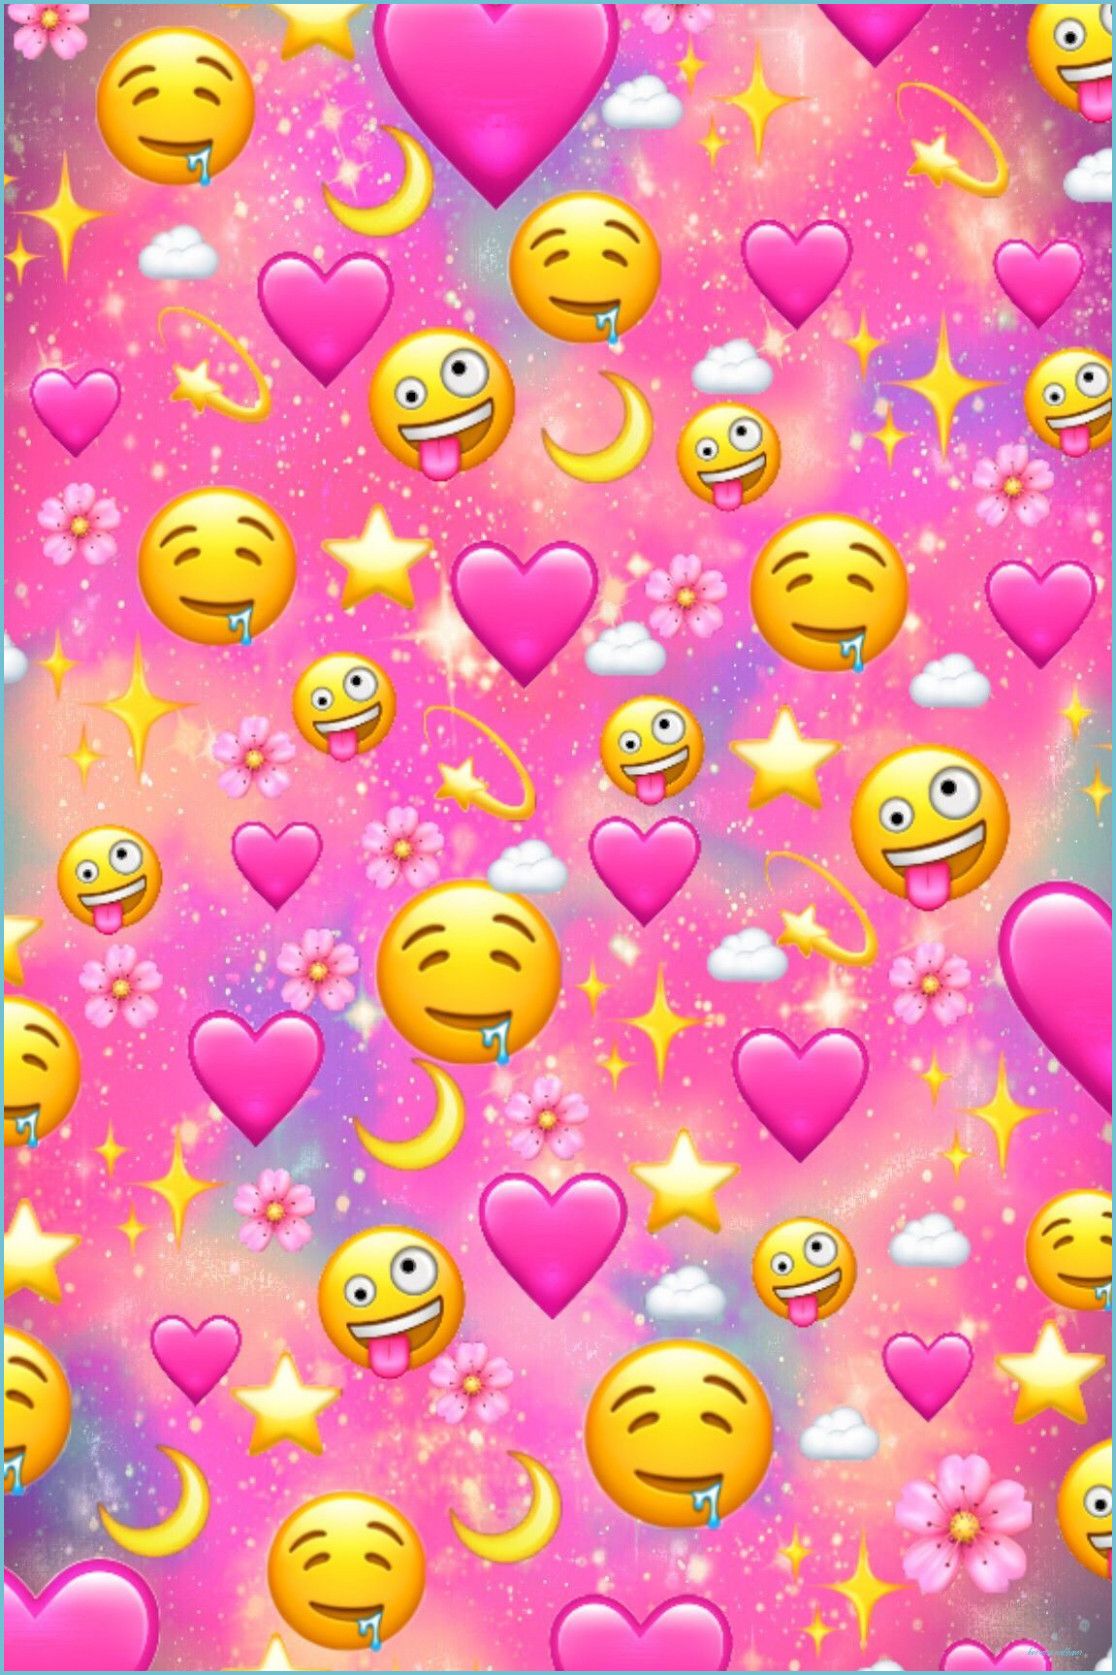 How To Leave Love Emoji Wallpaper Without Being Noticed